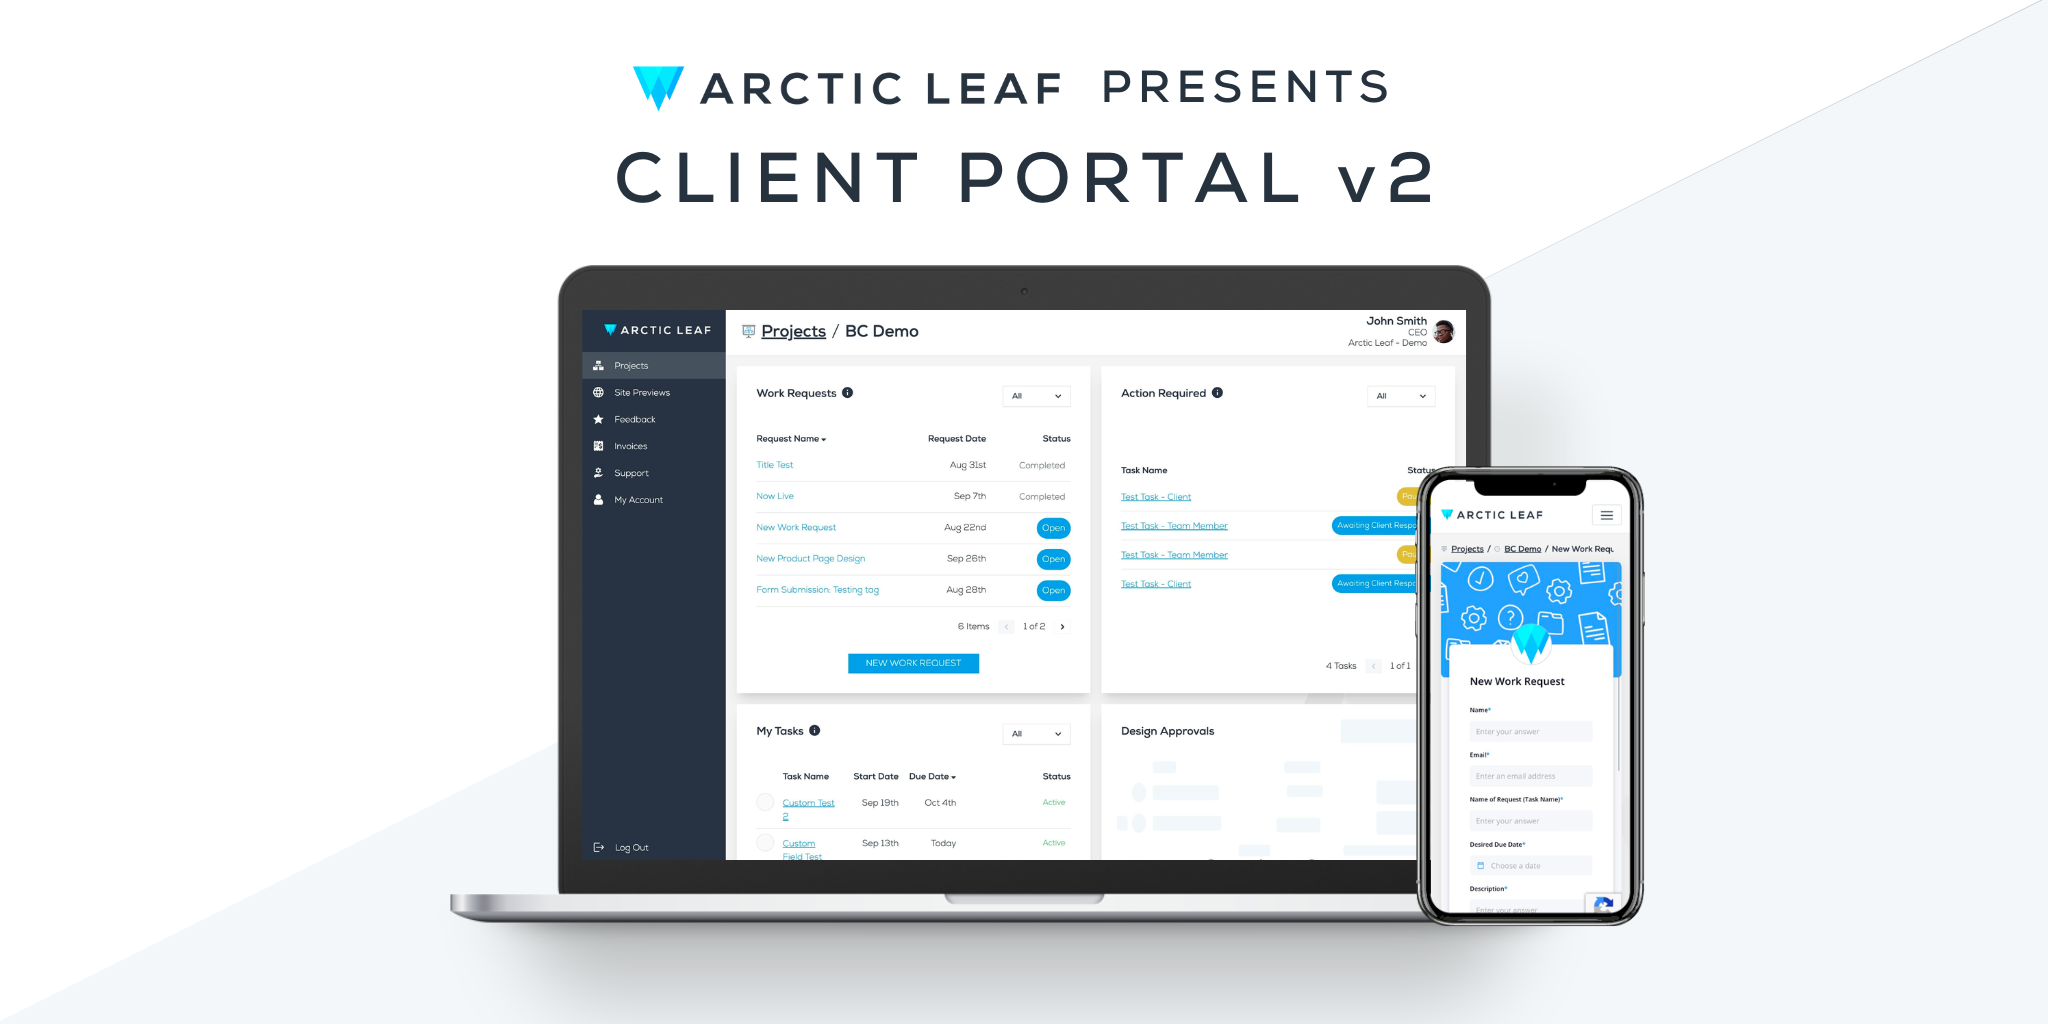 Arctic Leaf's Client Portal v2 with a laptop and phone showing a project dashboard